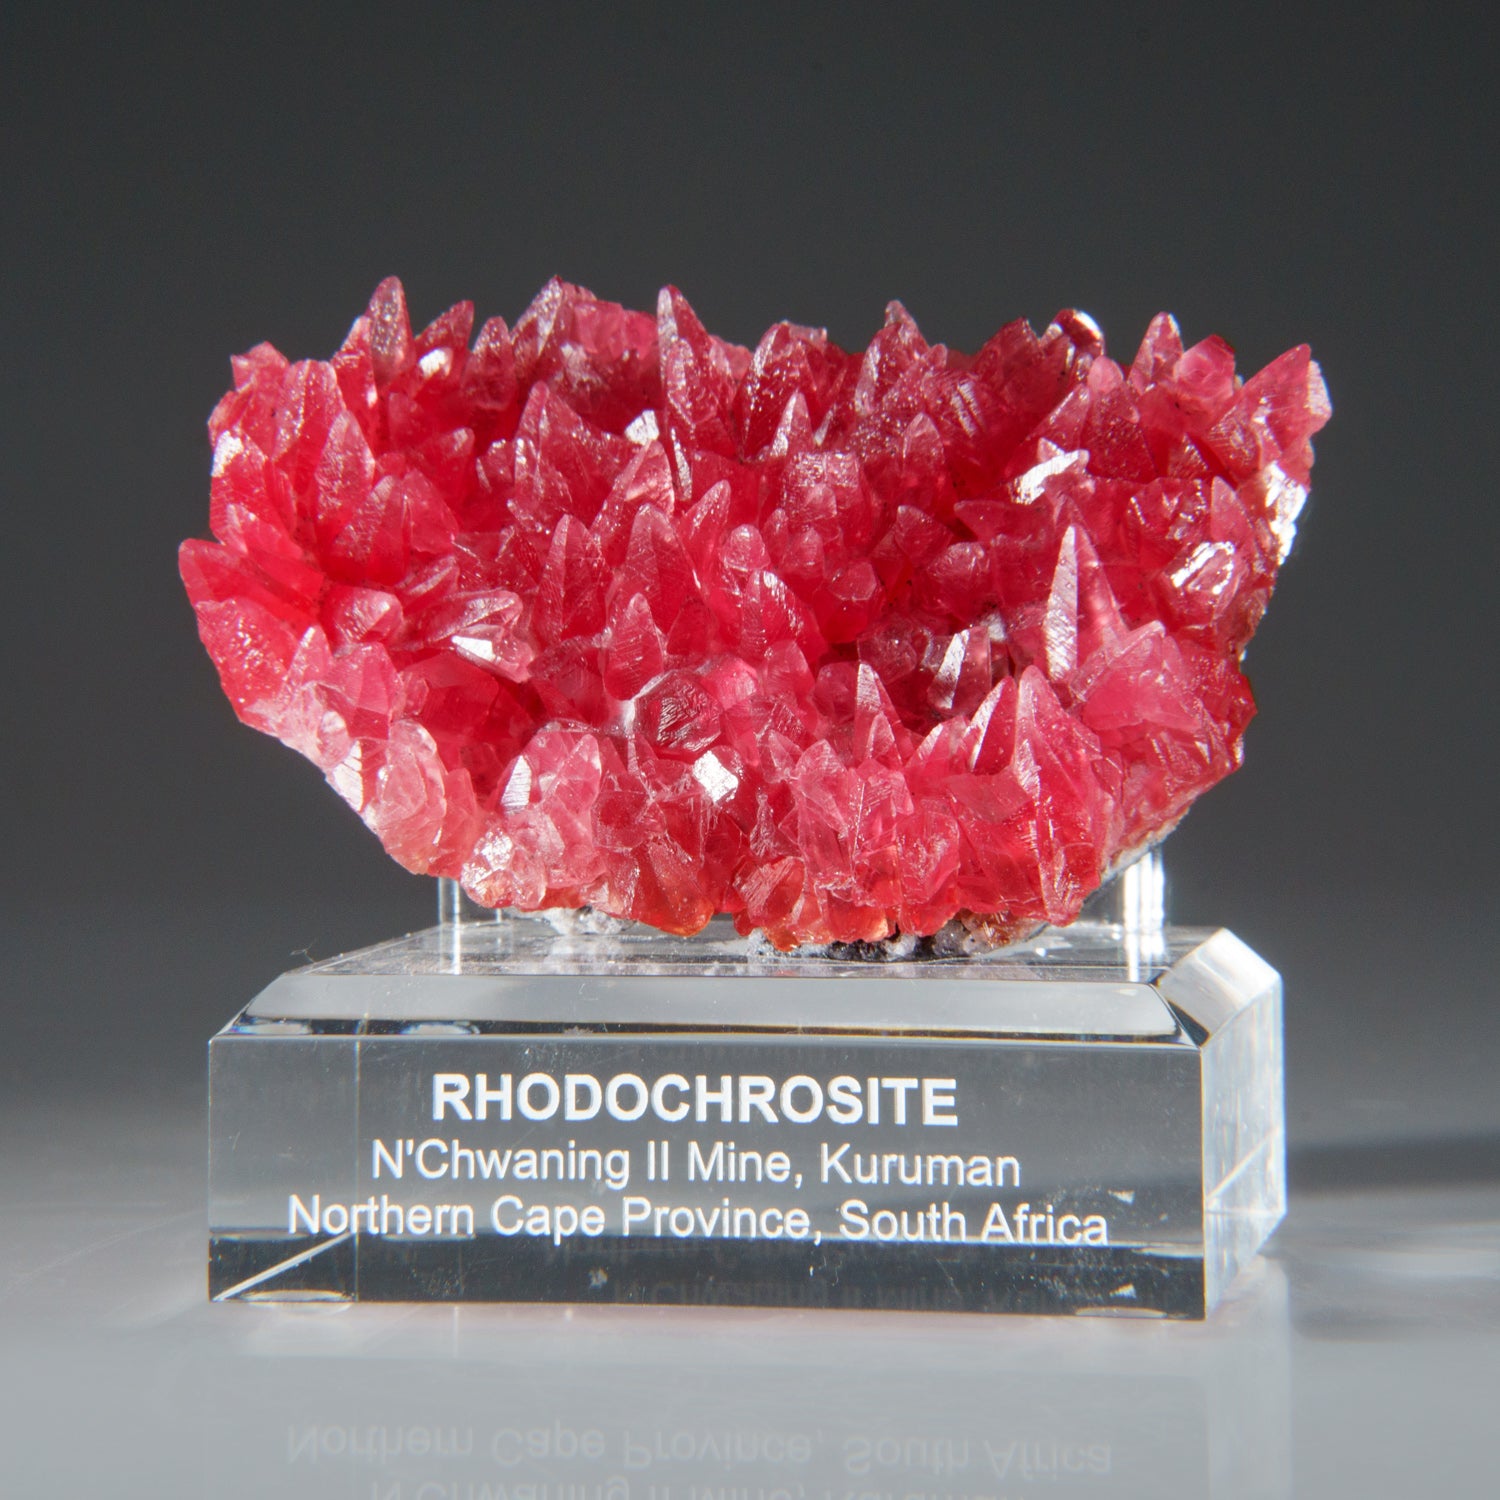 Rhodochrosite from N'Chwaning Mine, Northern Cape Province, South Africa